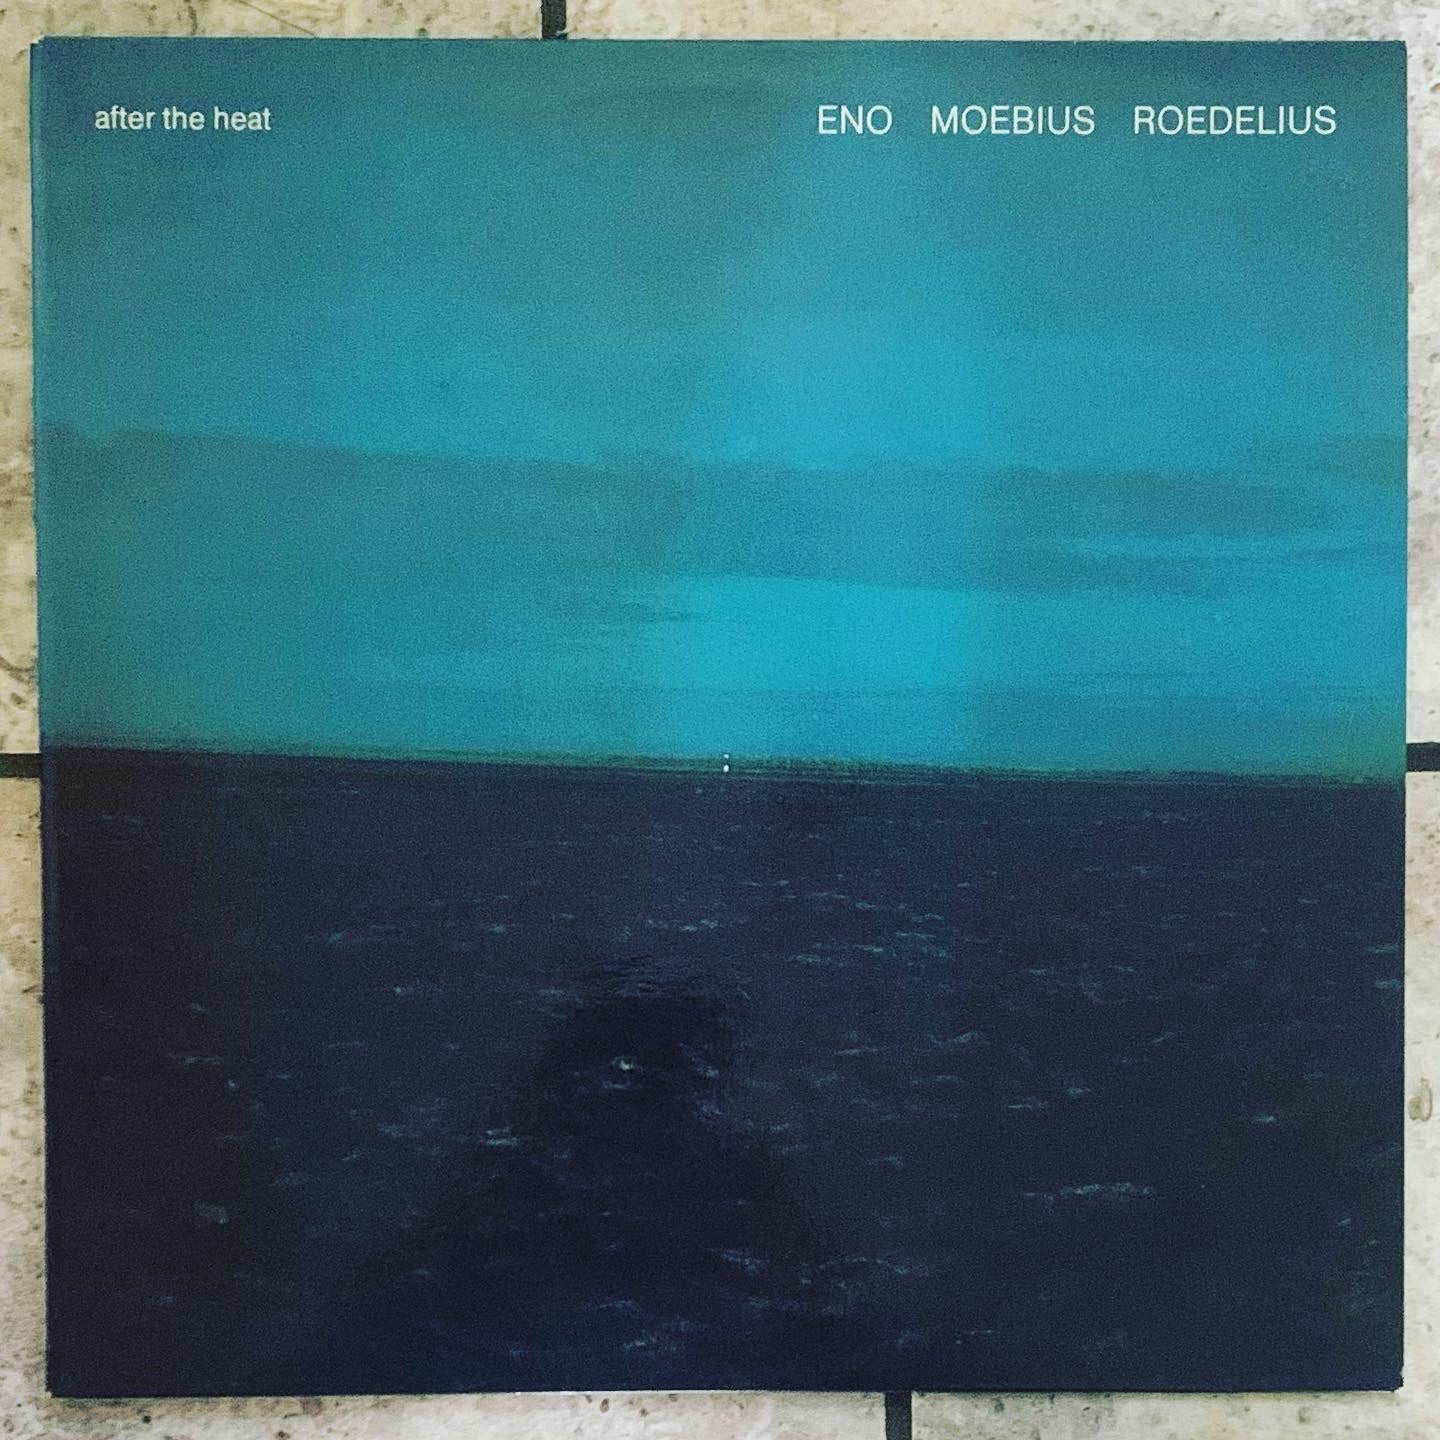 LP】ENO MOEBIUS ROEDELIUS/after the heat-